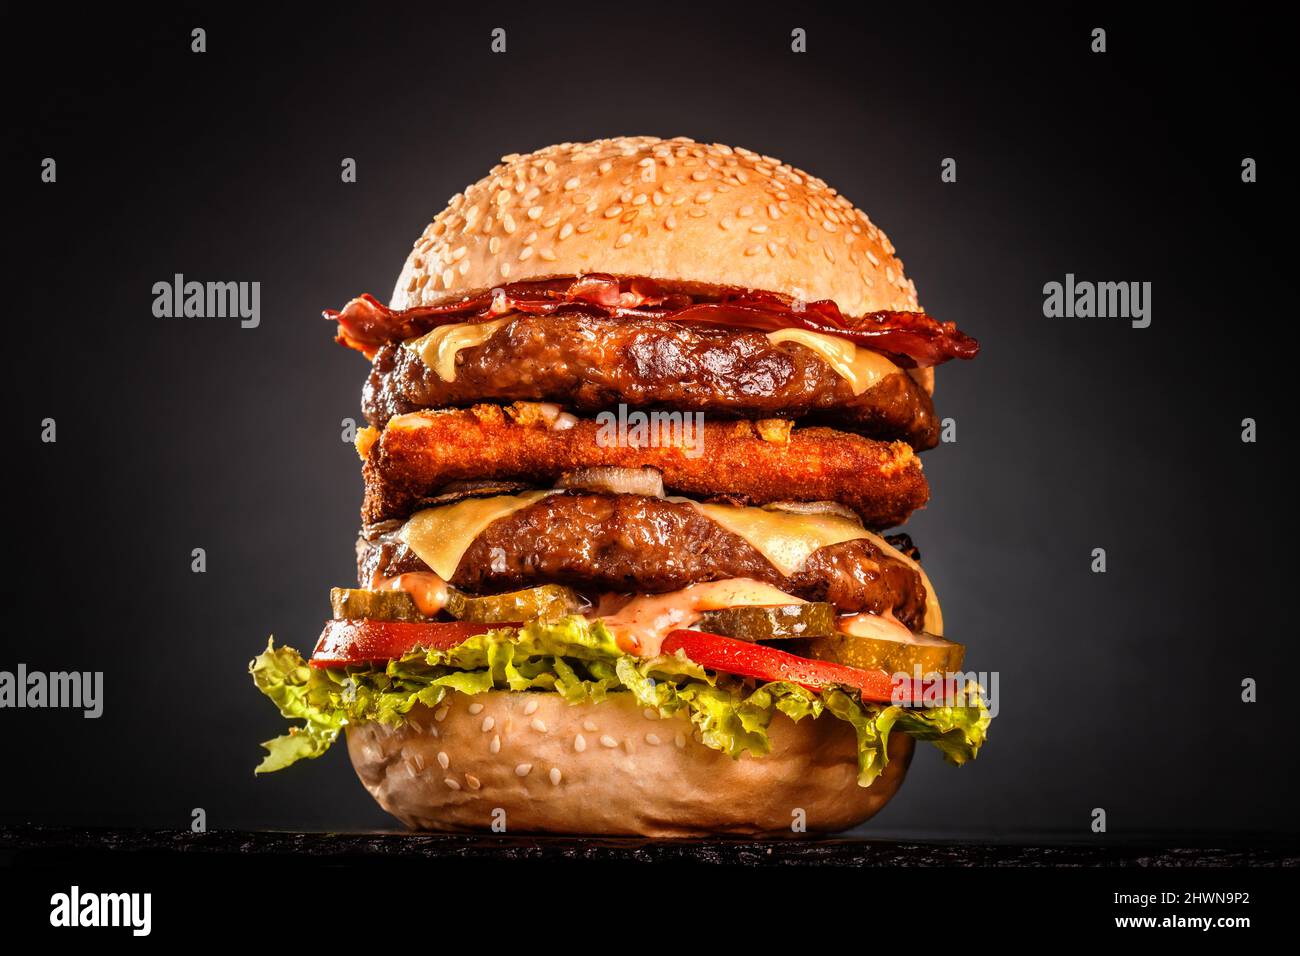 Double burger with bacon grilled yellow cheese onions tomatoes cucumber and lettuce. Isolated on black background. Stock Photo